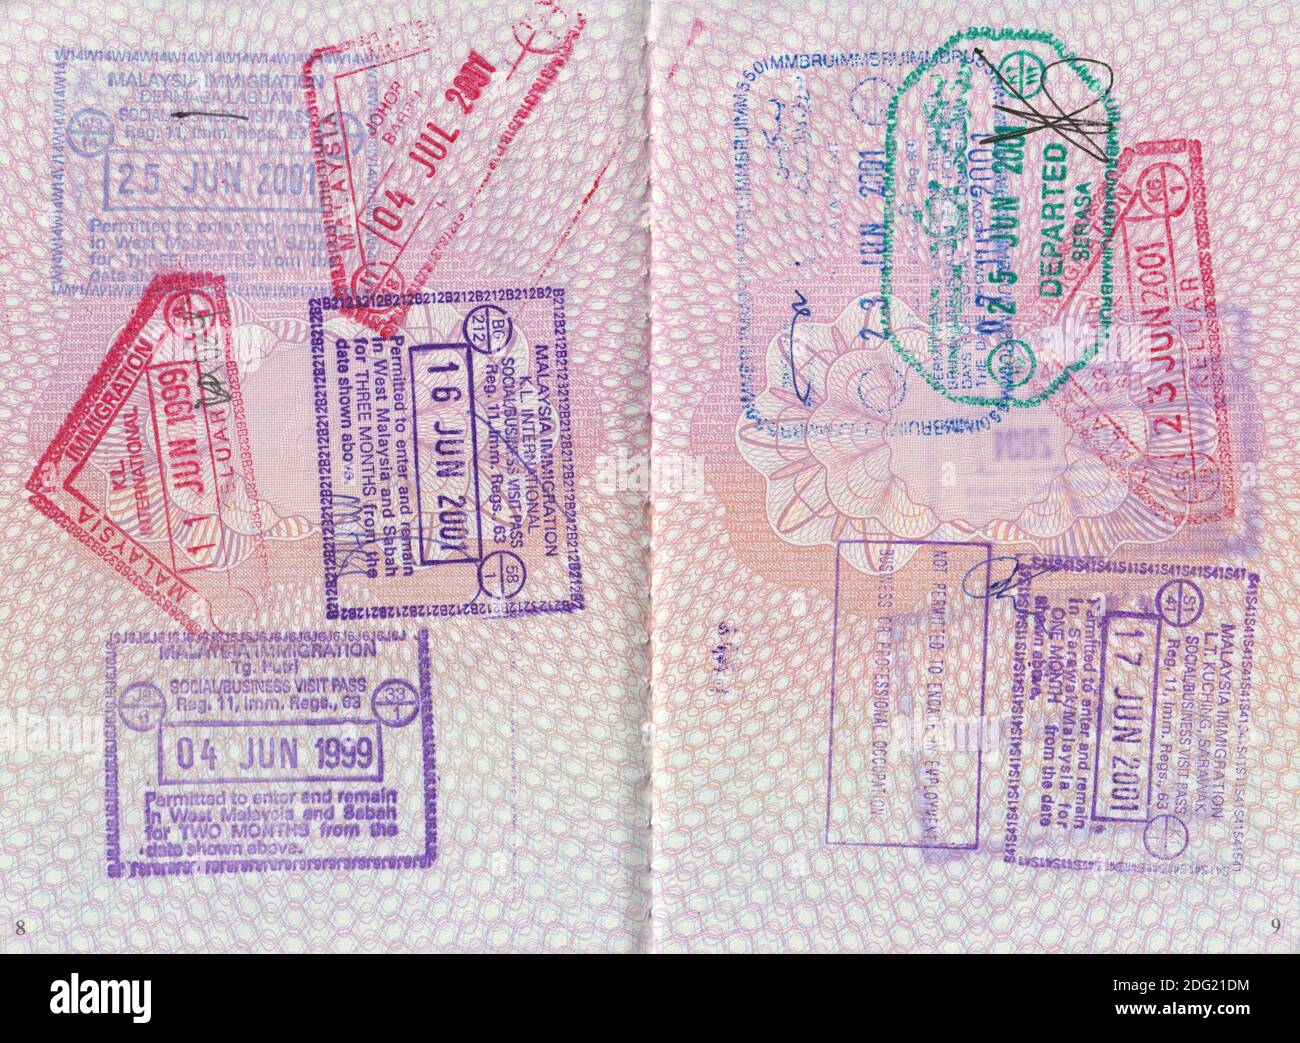 UK passport pages with Malaysia and Brunei entry/exit stamps (see additional info for full details) Stock Photo